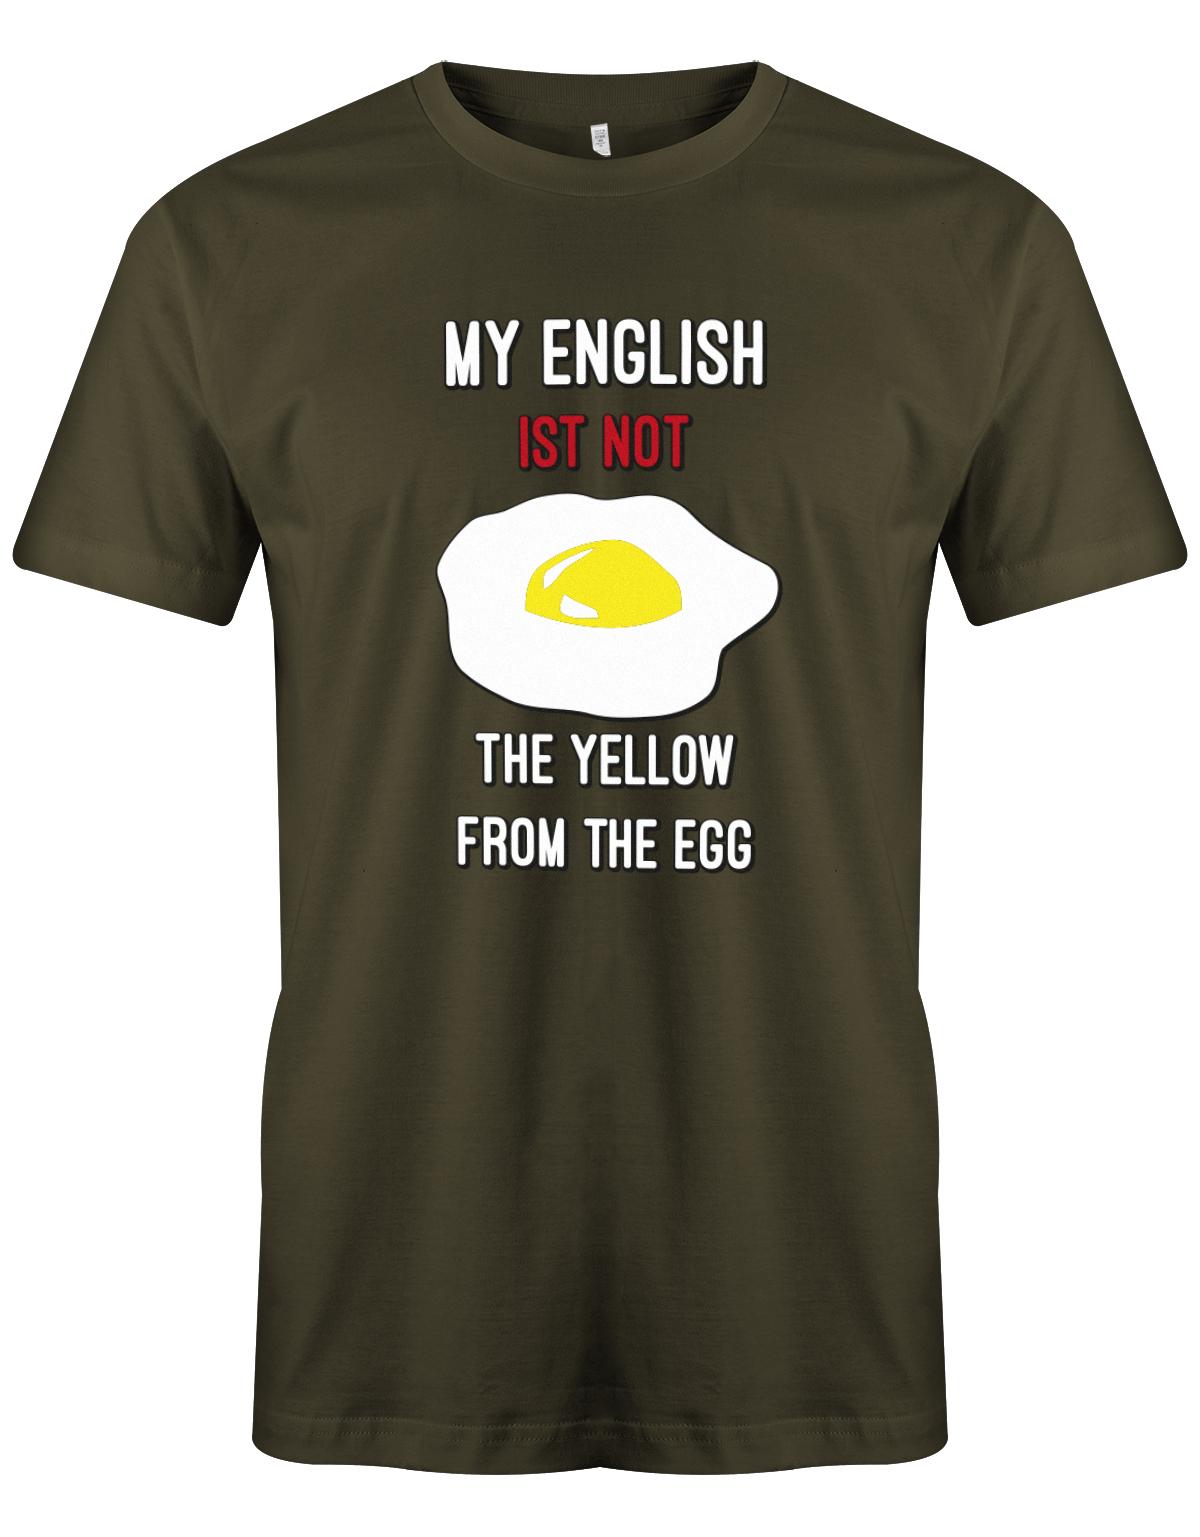 My-English-is-not-the-yellow-from-the-egg-Herren-Shirt-Army